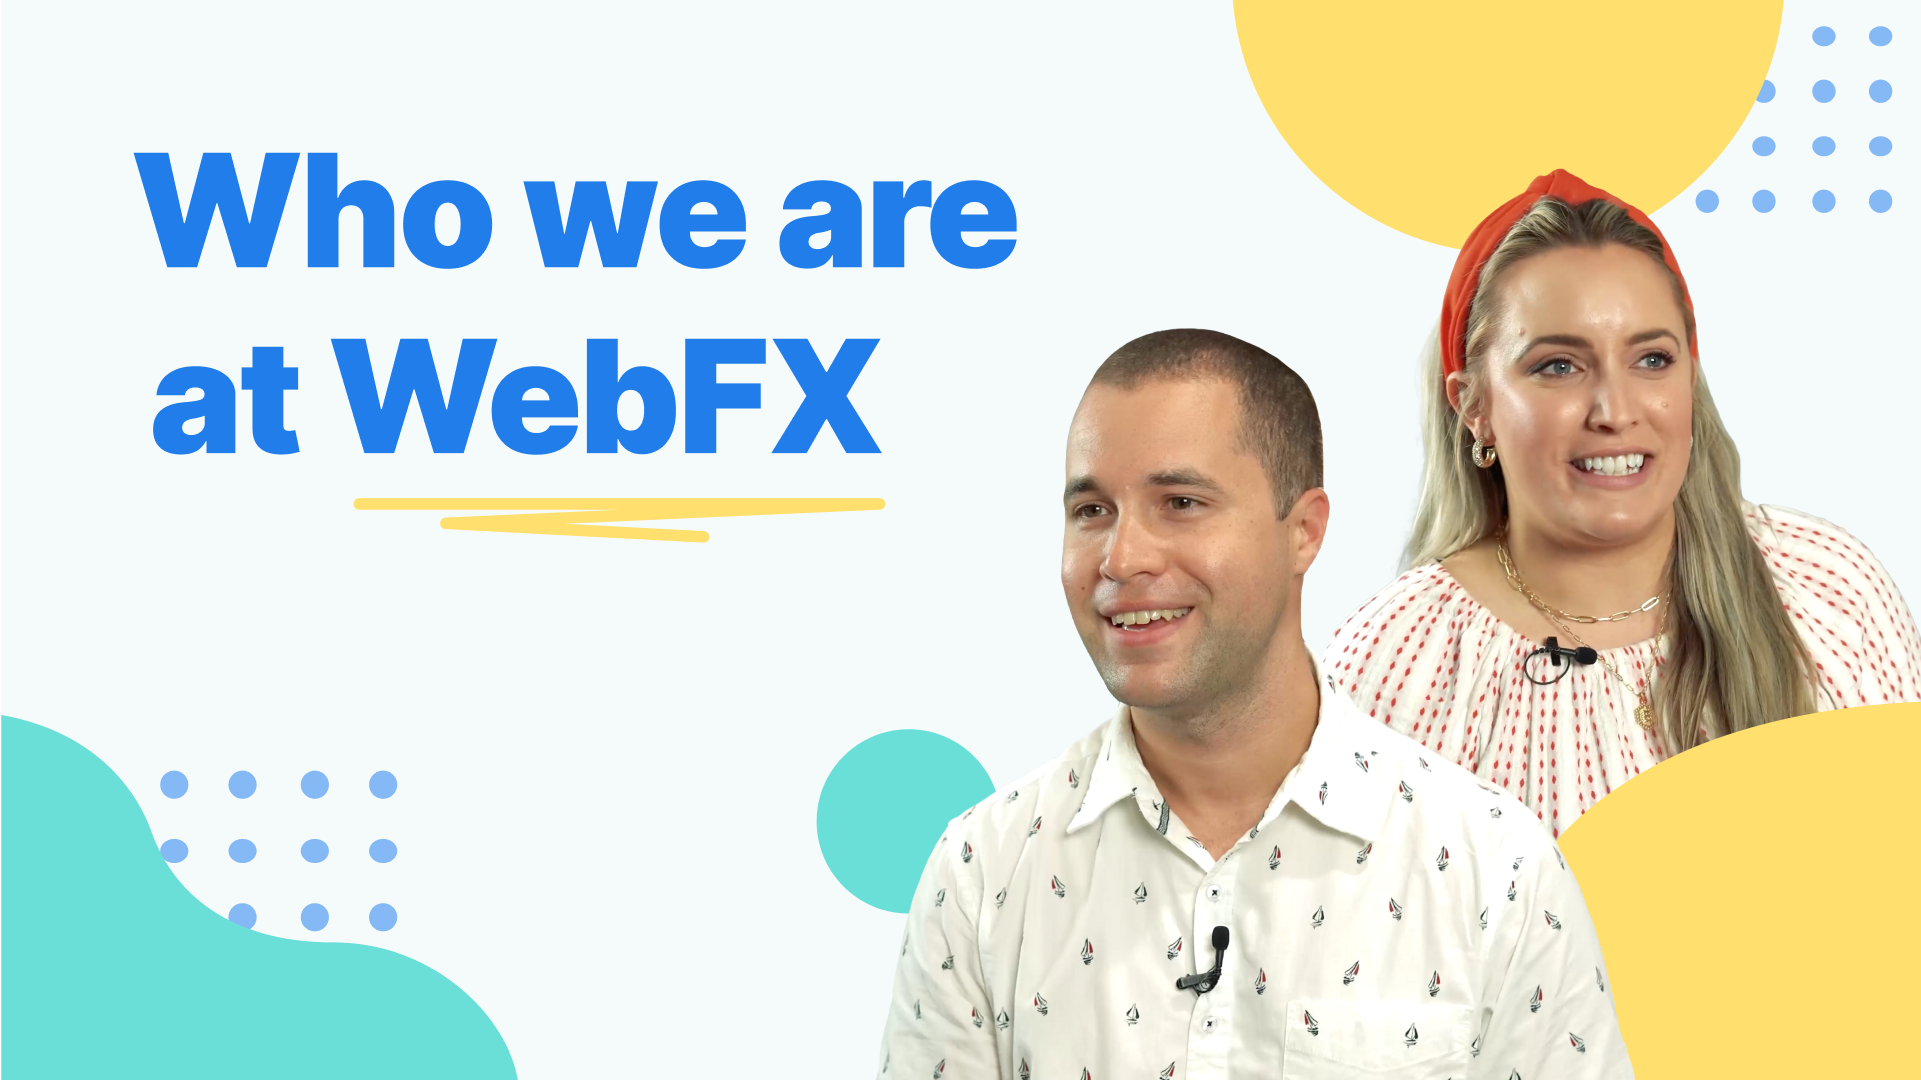 Who we are at WebFX